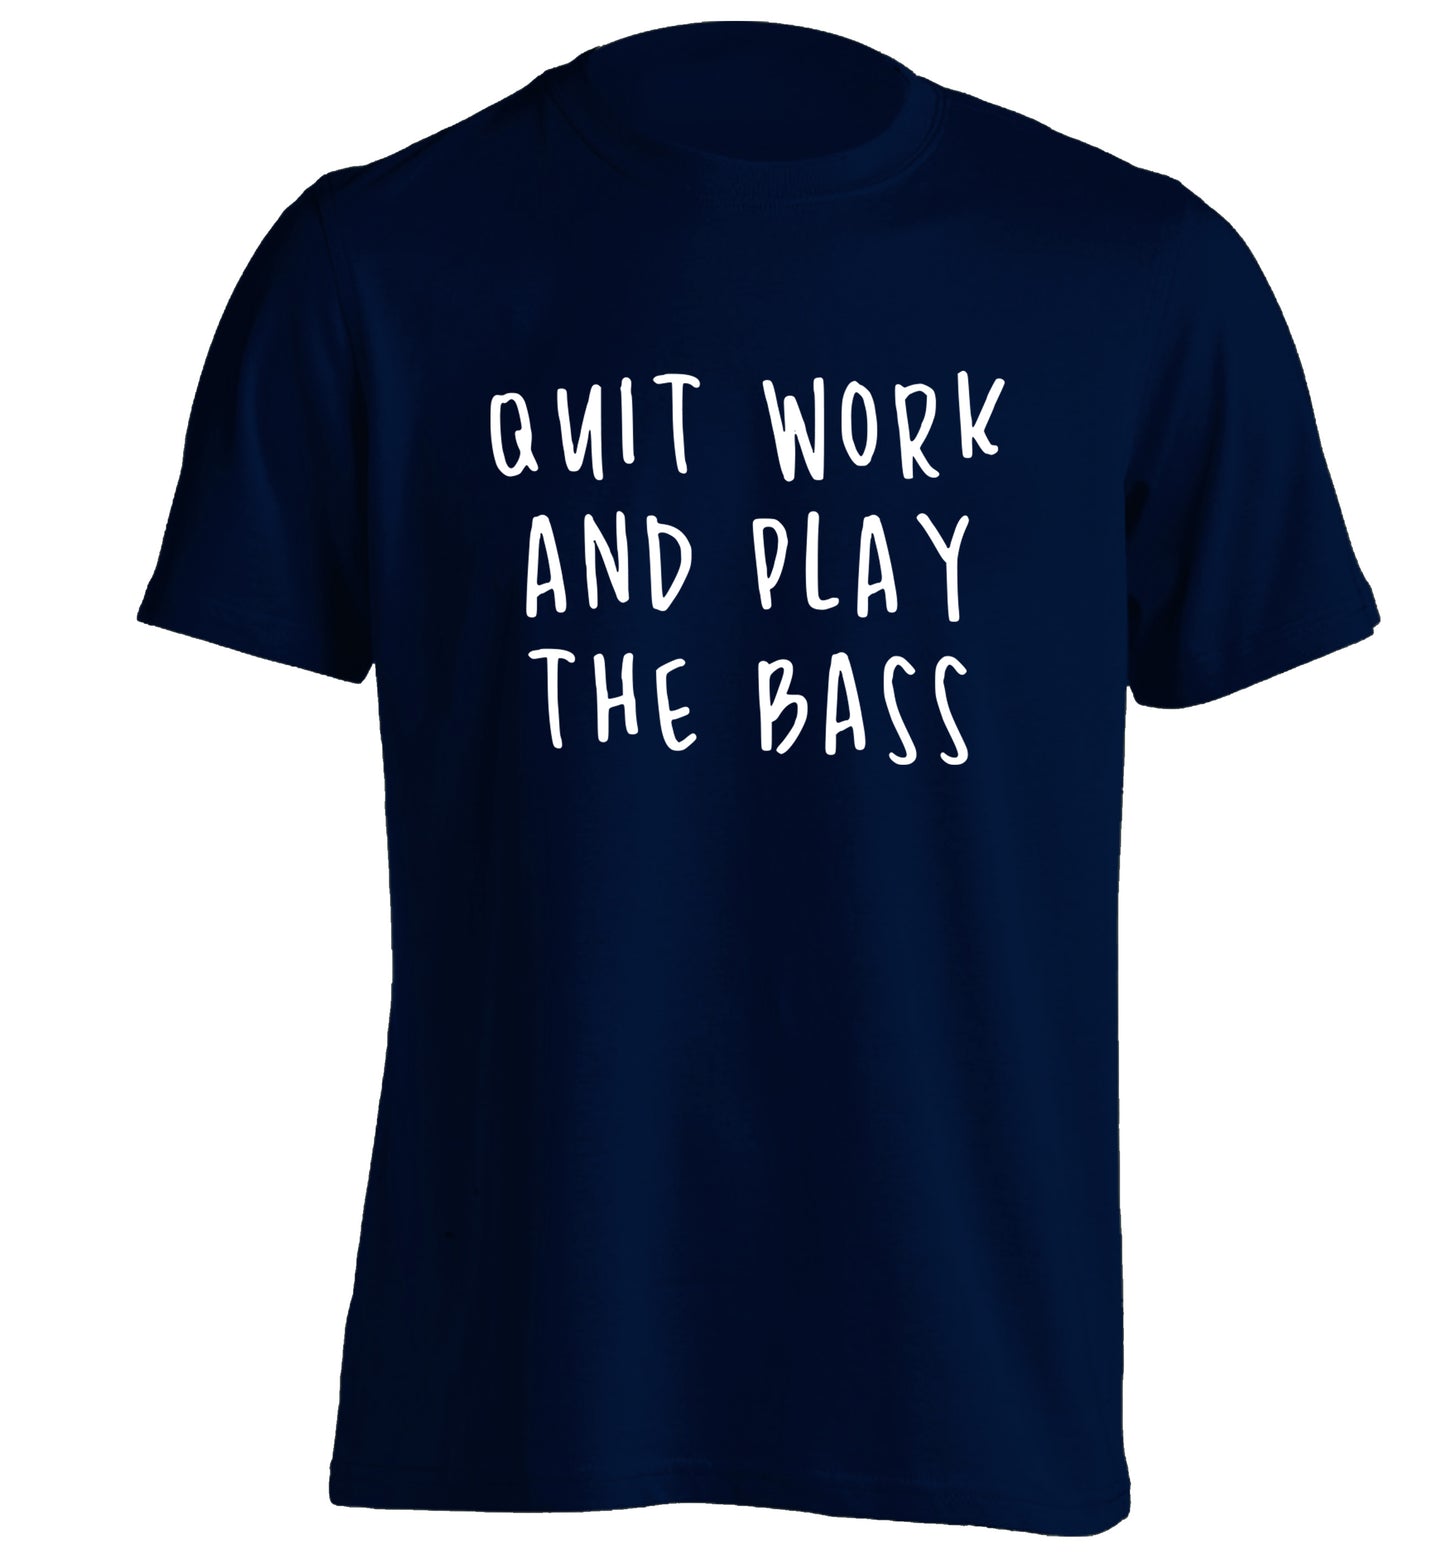 Quit work and play the bass adults unisex navy Tshirt 2XL